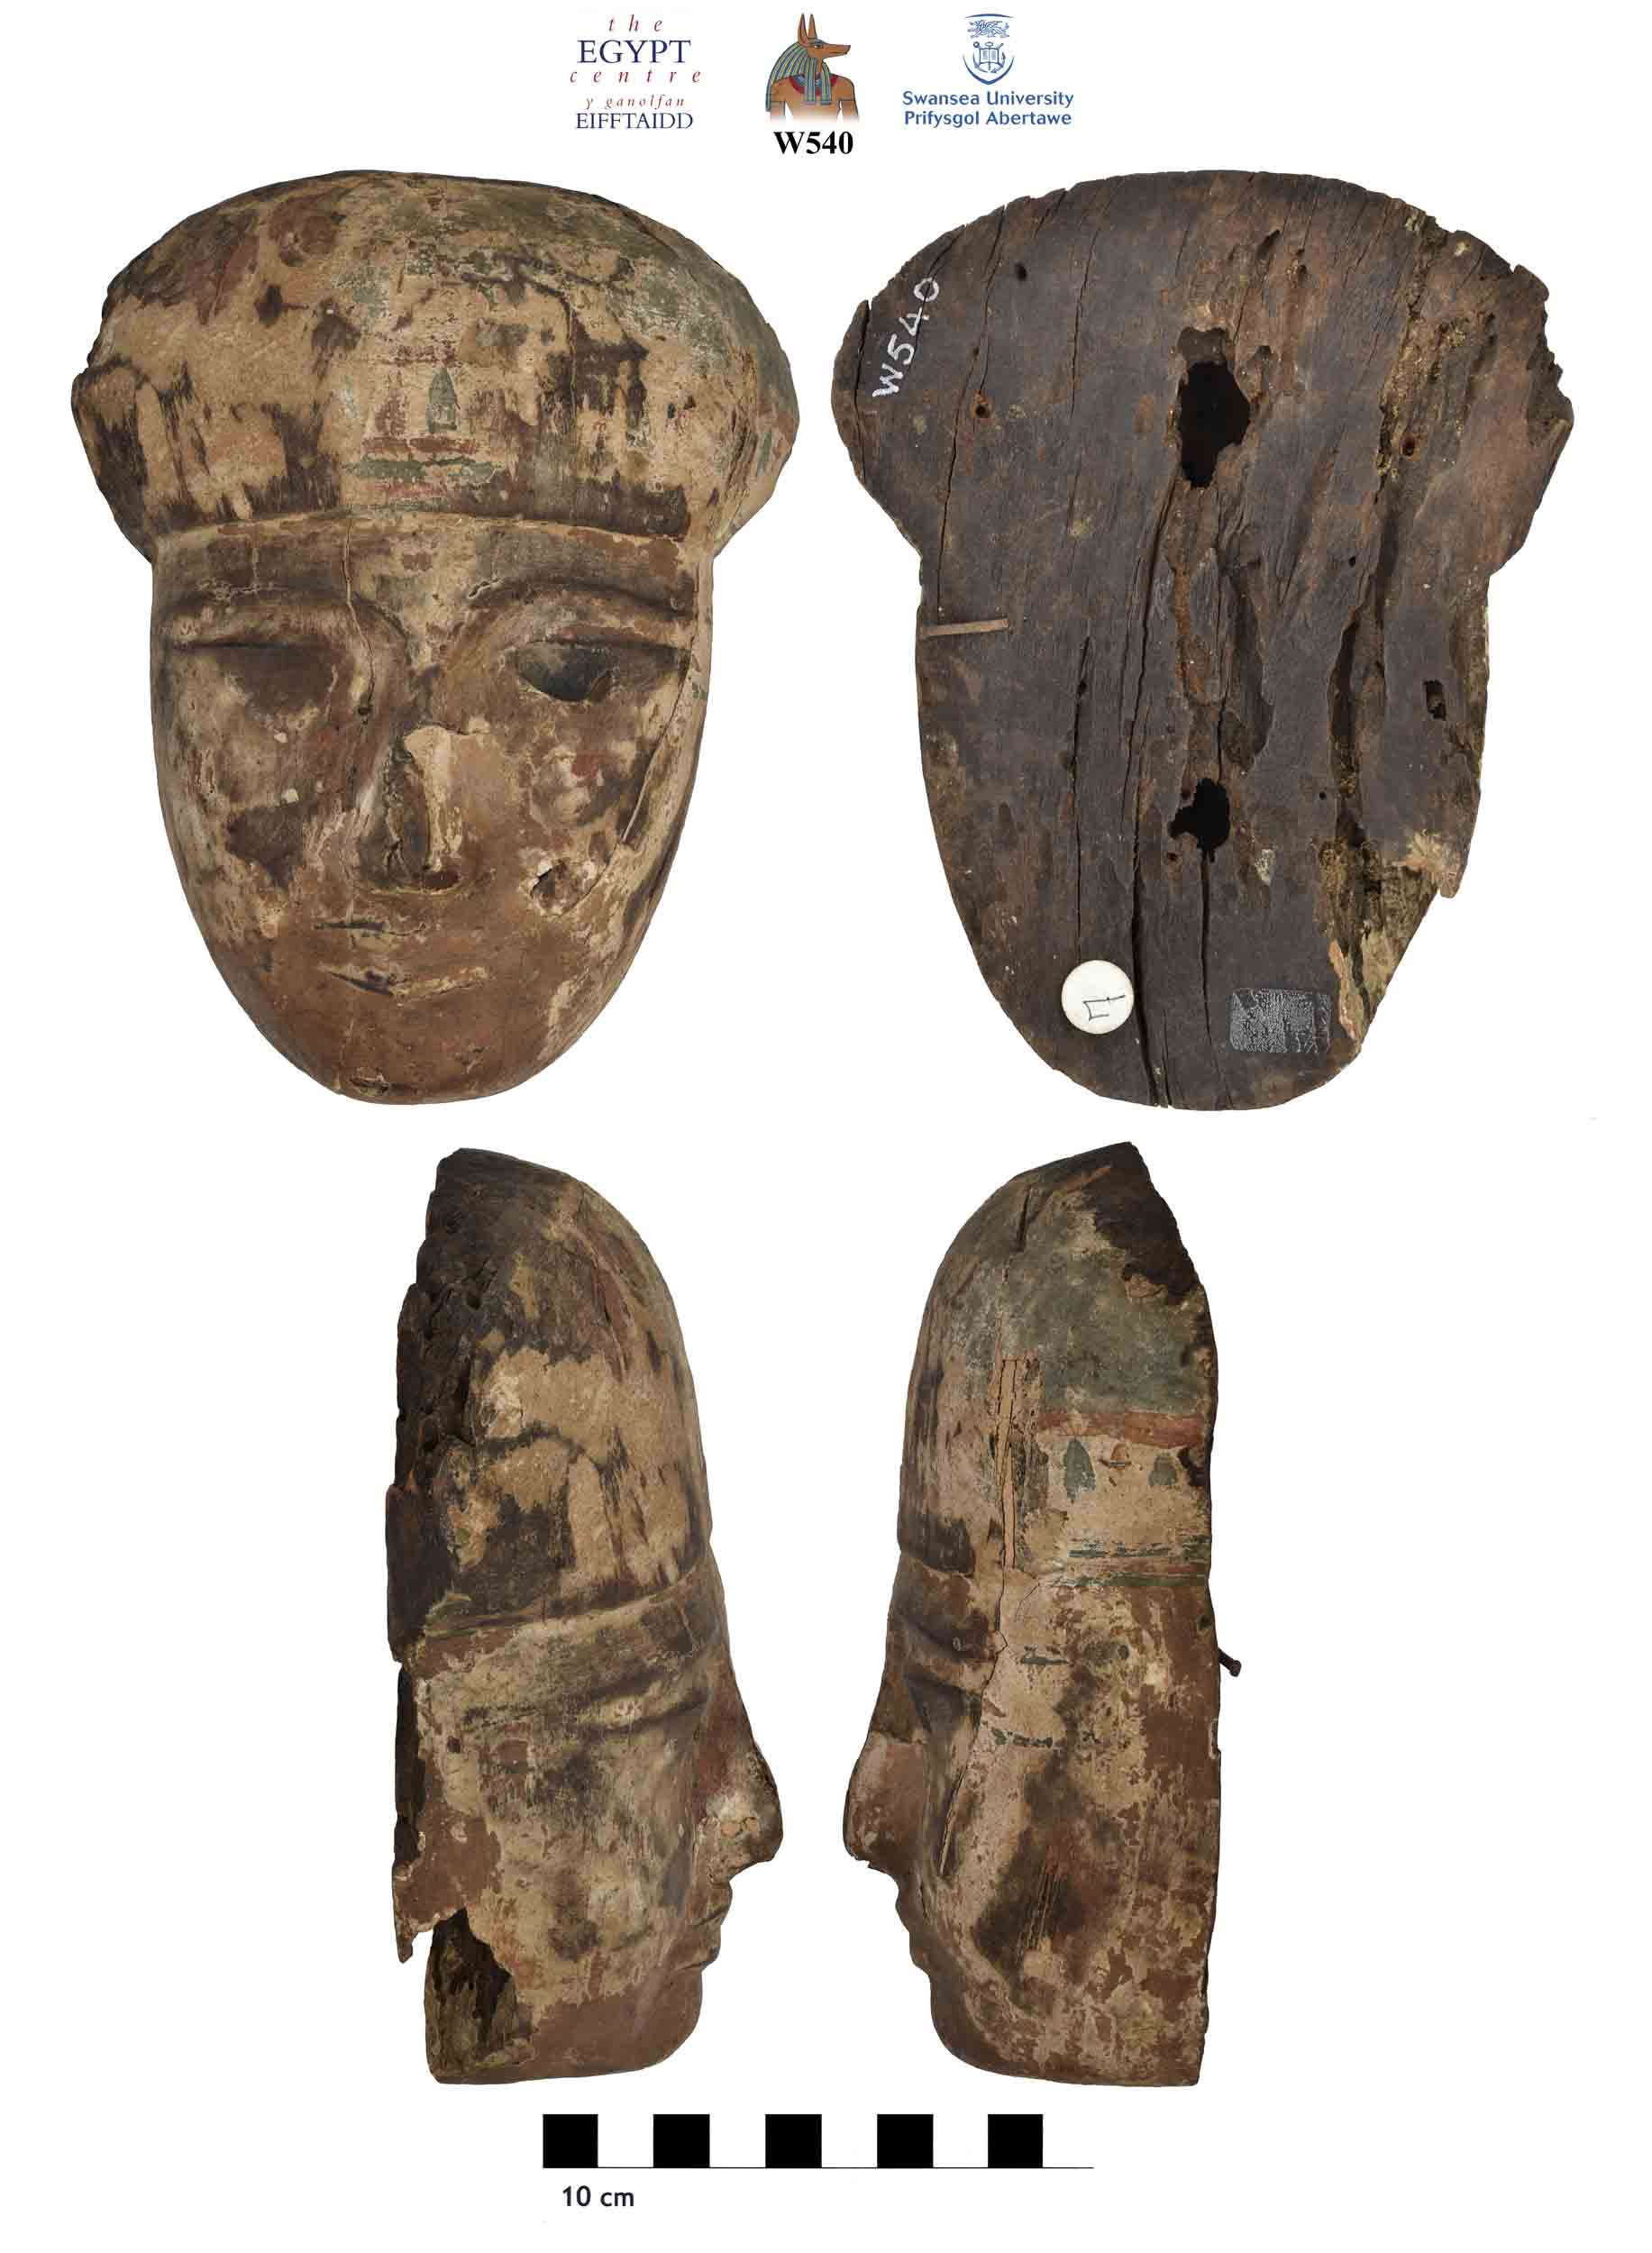 Image for: Painted wooden face from a coffin